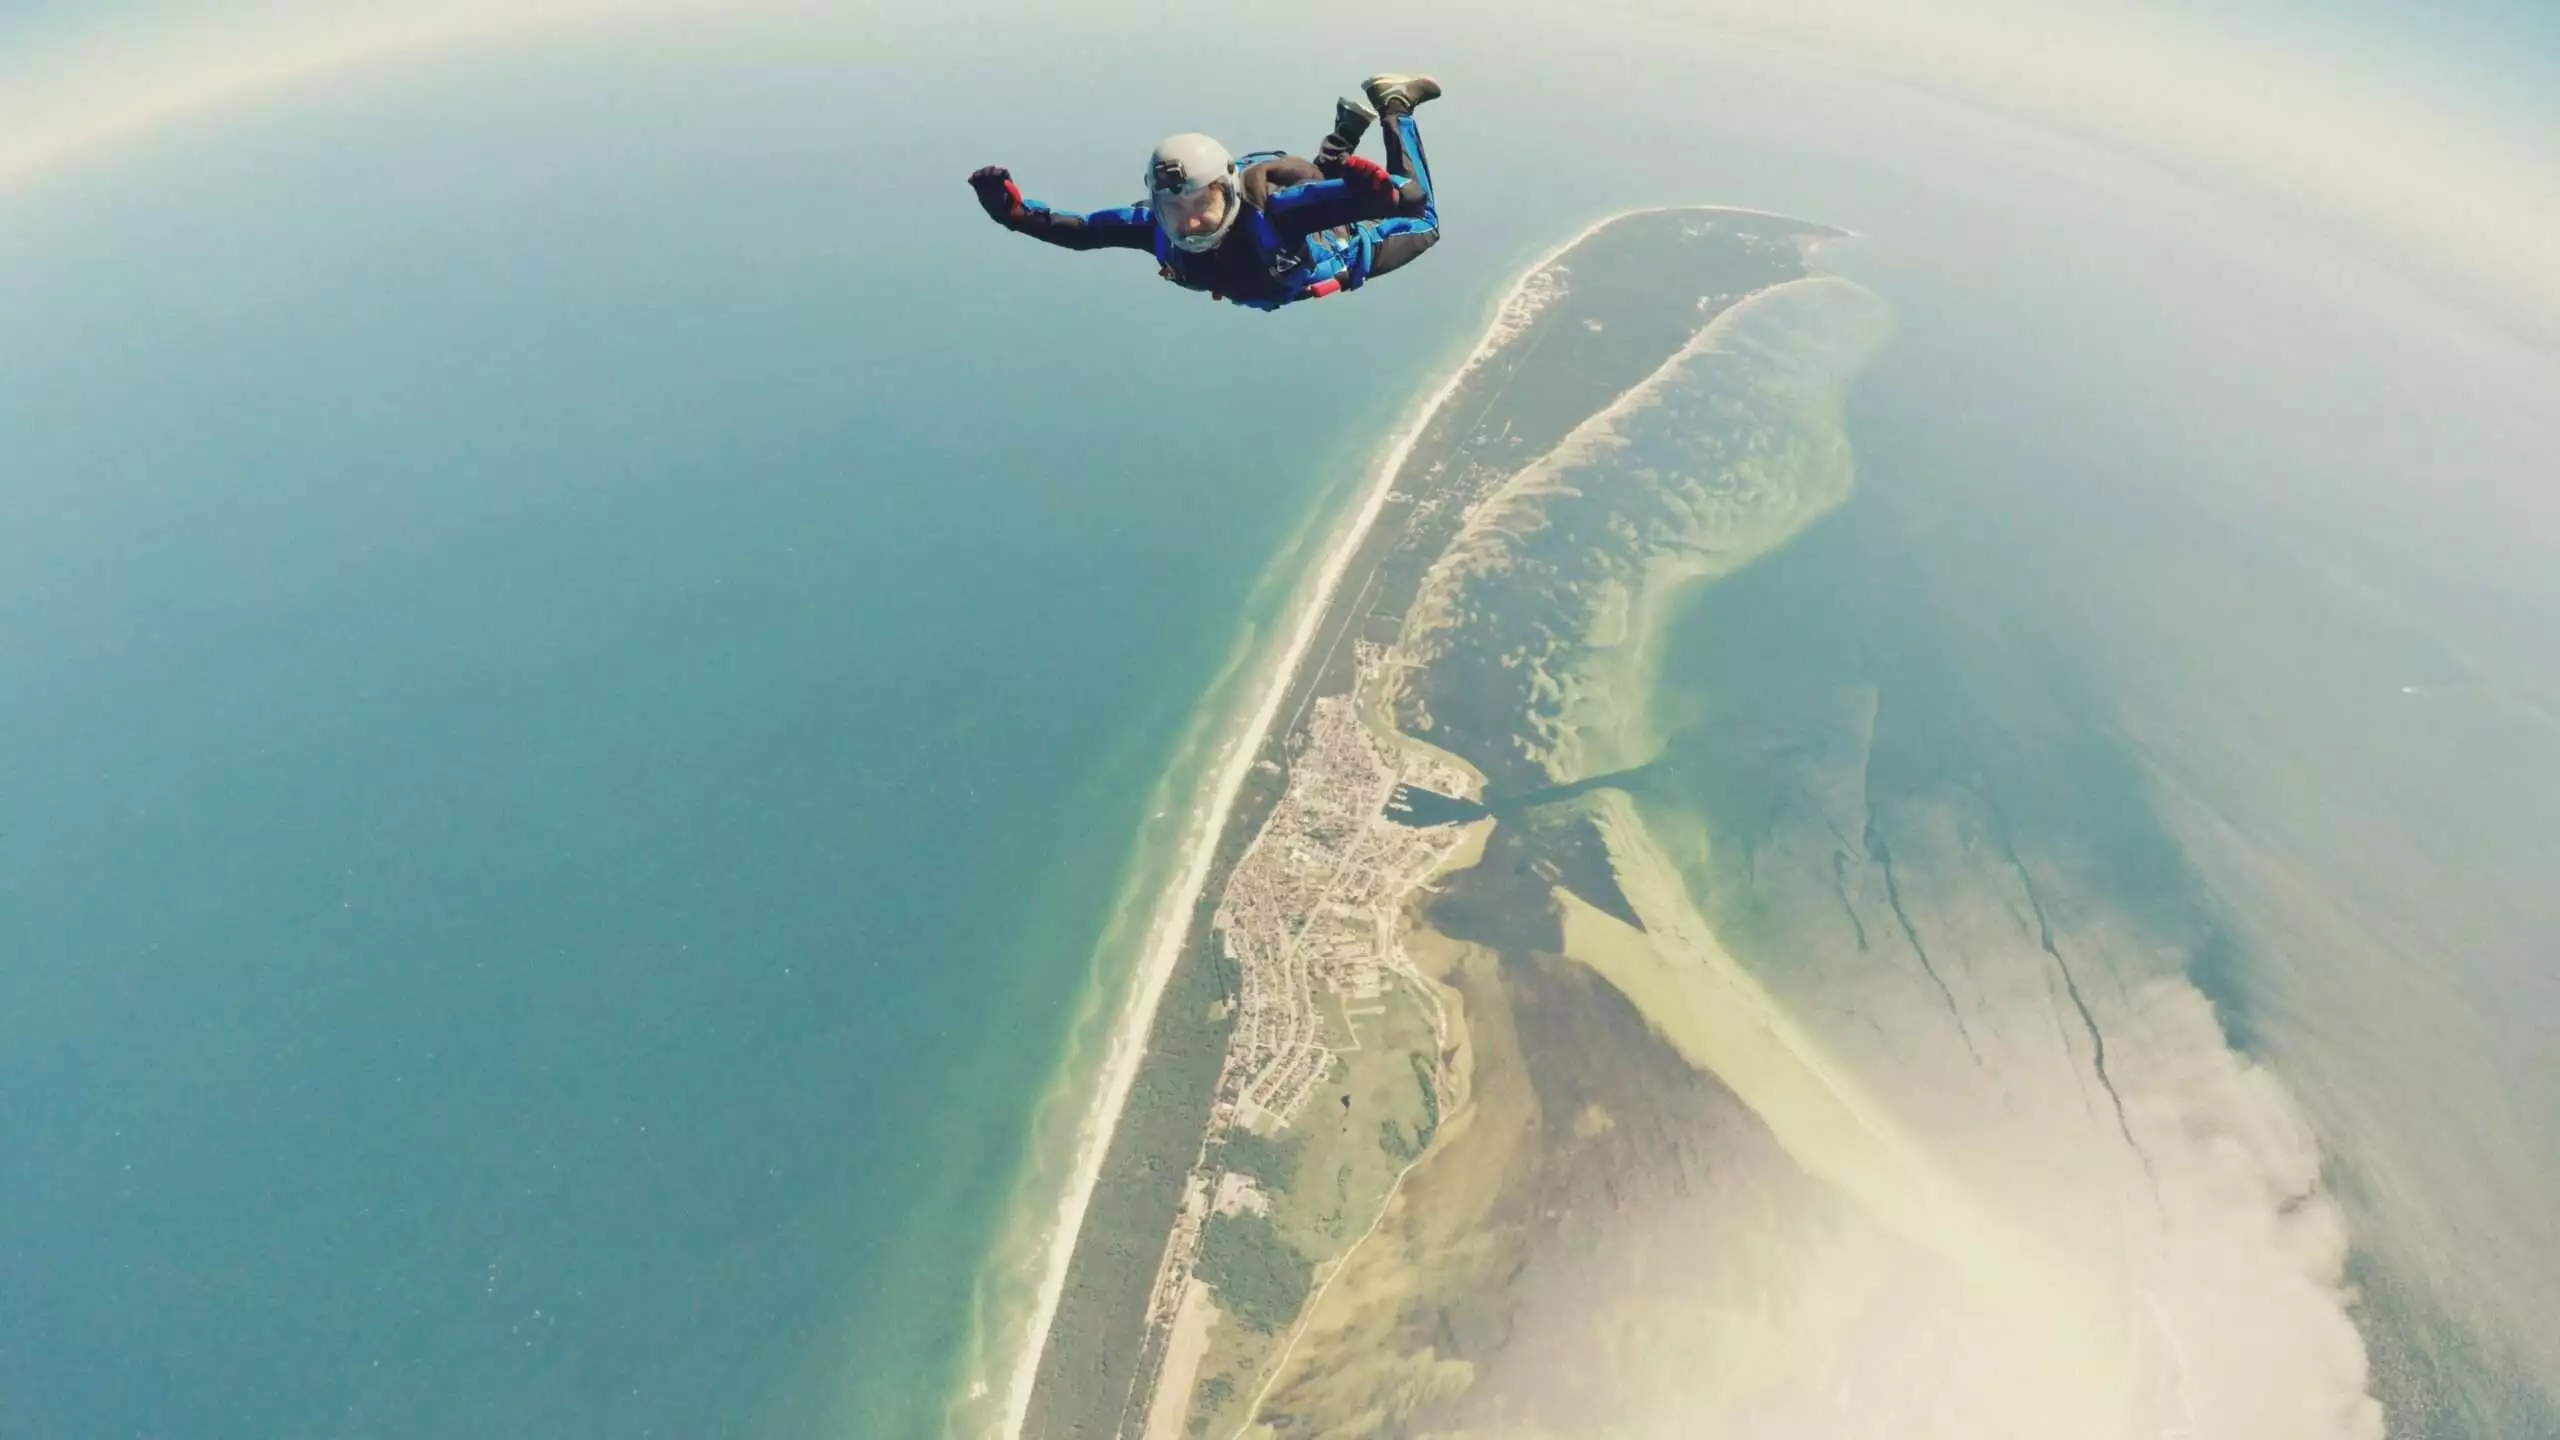 Skydiving in Vancouver? - 5 Things You Should Know! 3